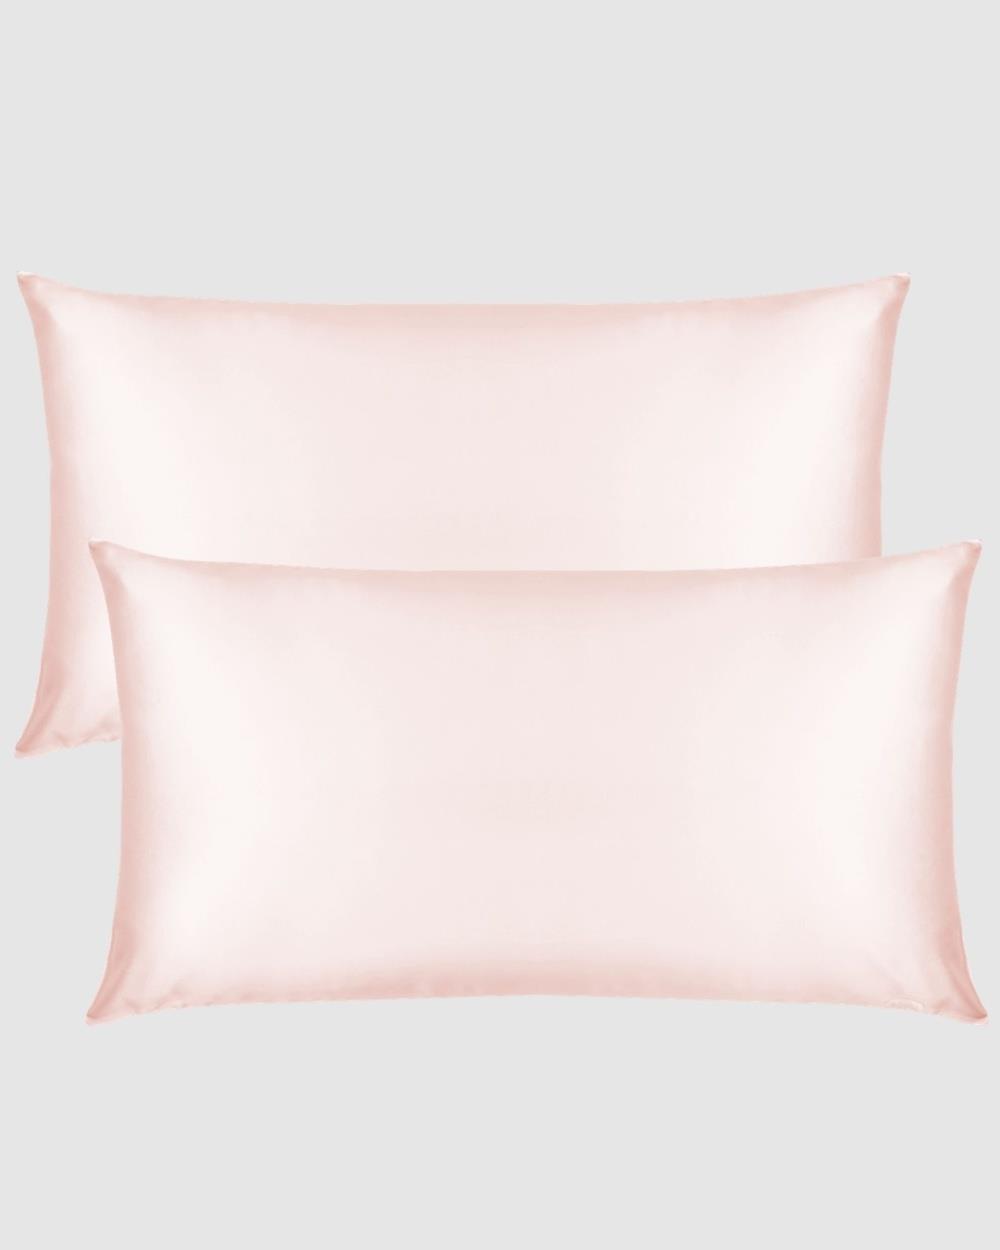 The Goodnight Co. - King Size Twin Set Silk Pillowcase - Sleep (Pink) King Size Twin Set Silk Pillowcase